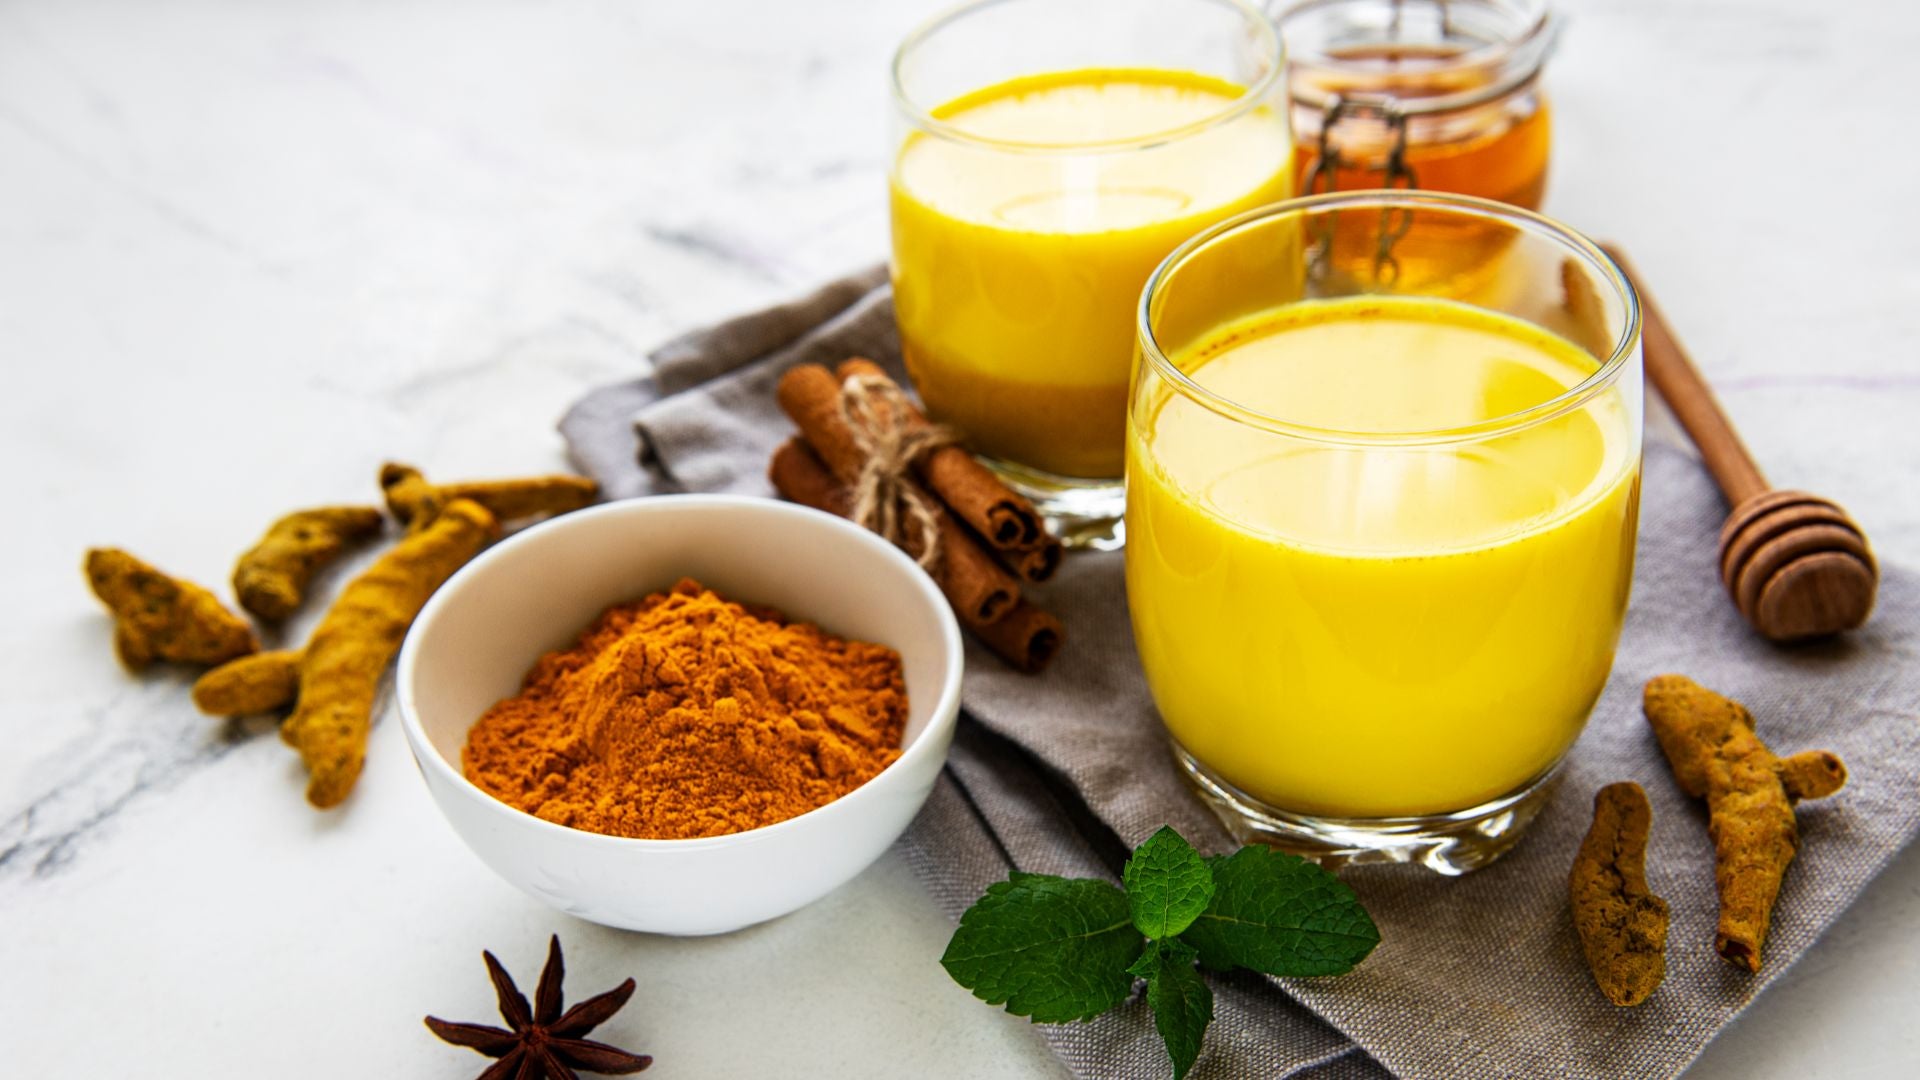 What are the benefits of turmeric supplements?